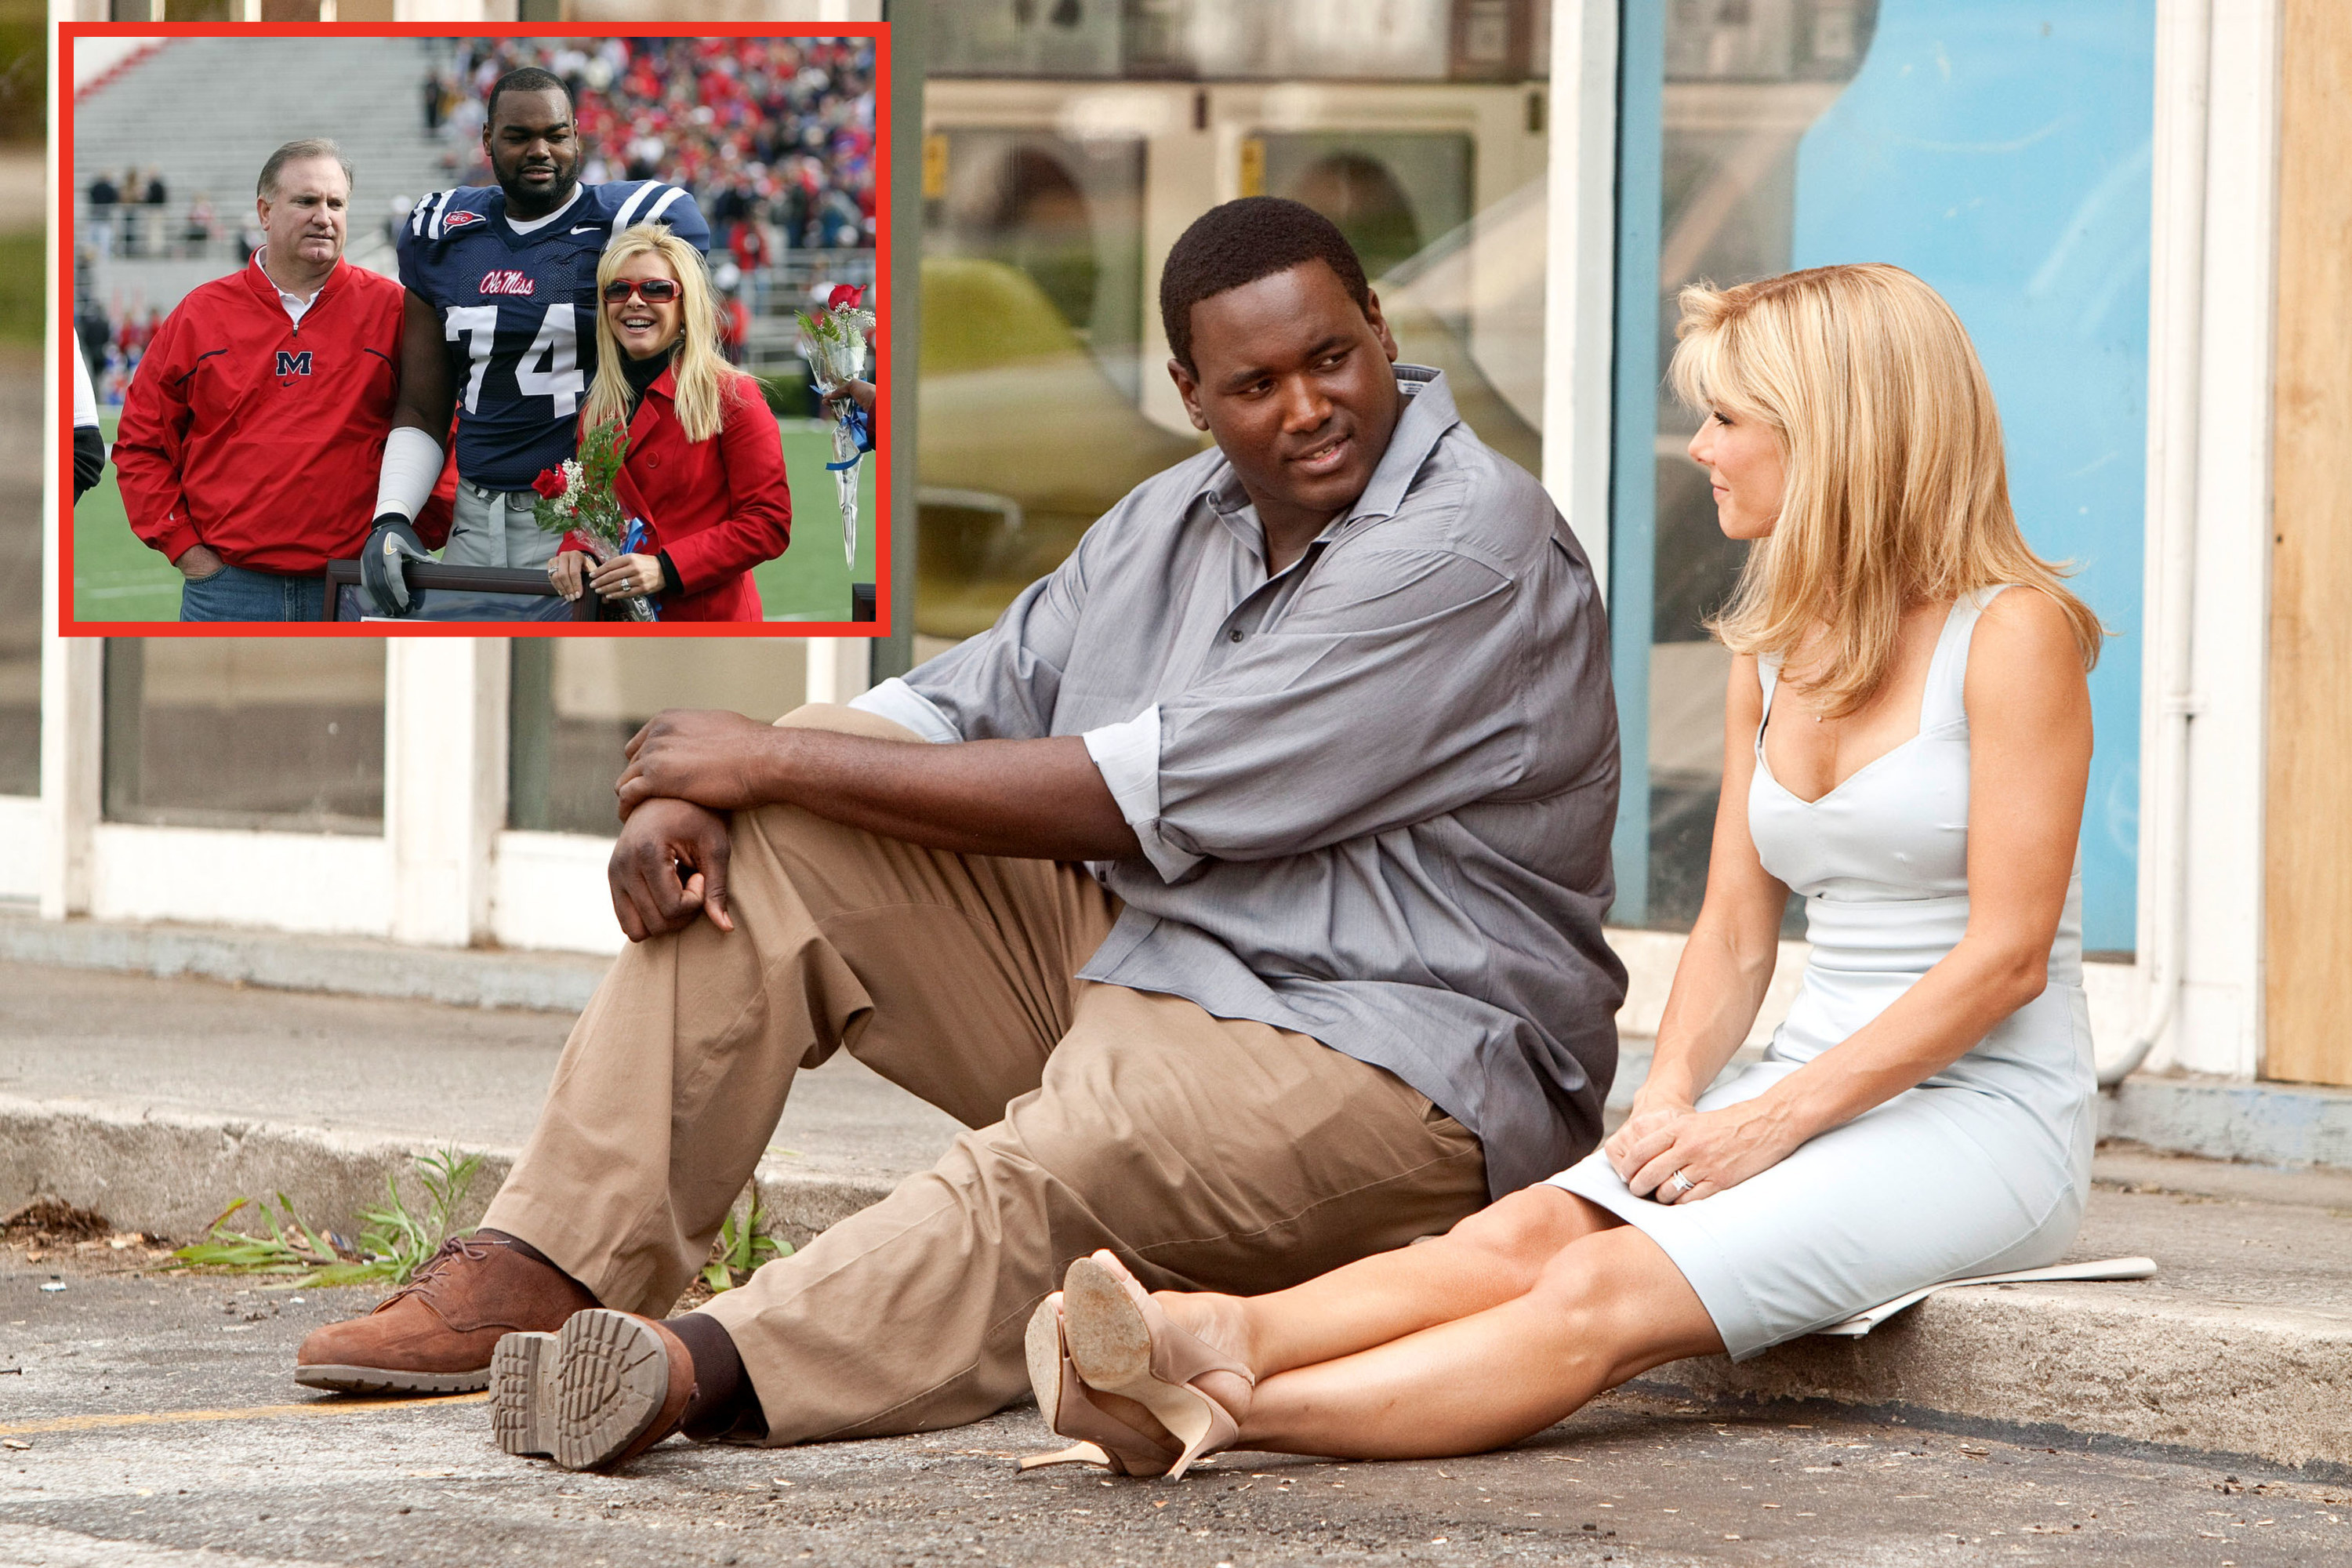 Sandra Bullock as Leigh Anne Tuohy sits next to Quinton Aaron as Michael Oher in &quot;The Blind Side&quot;